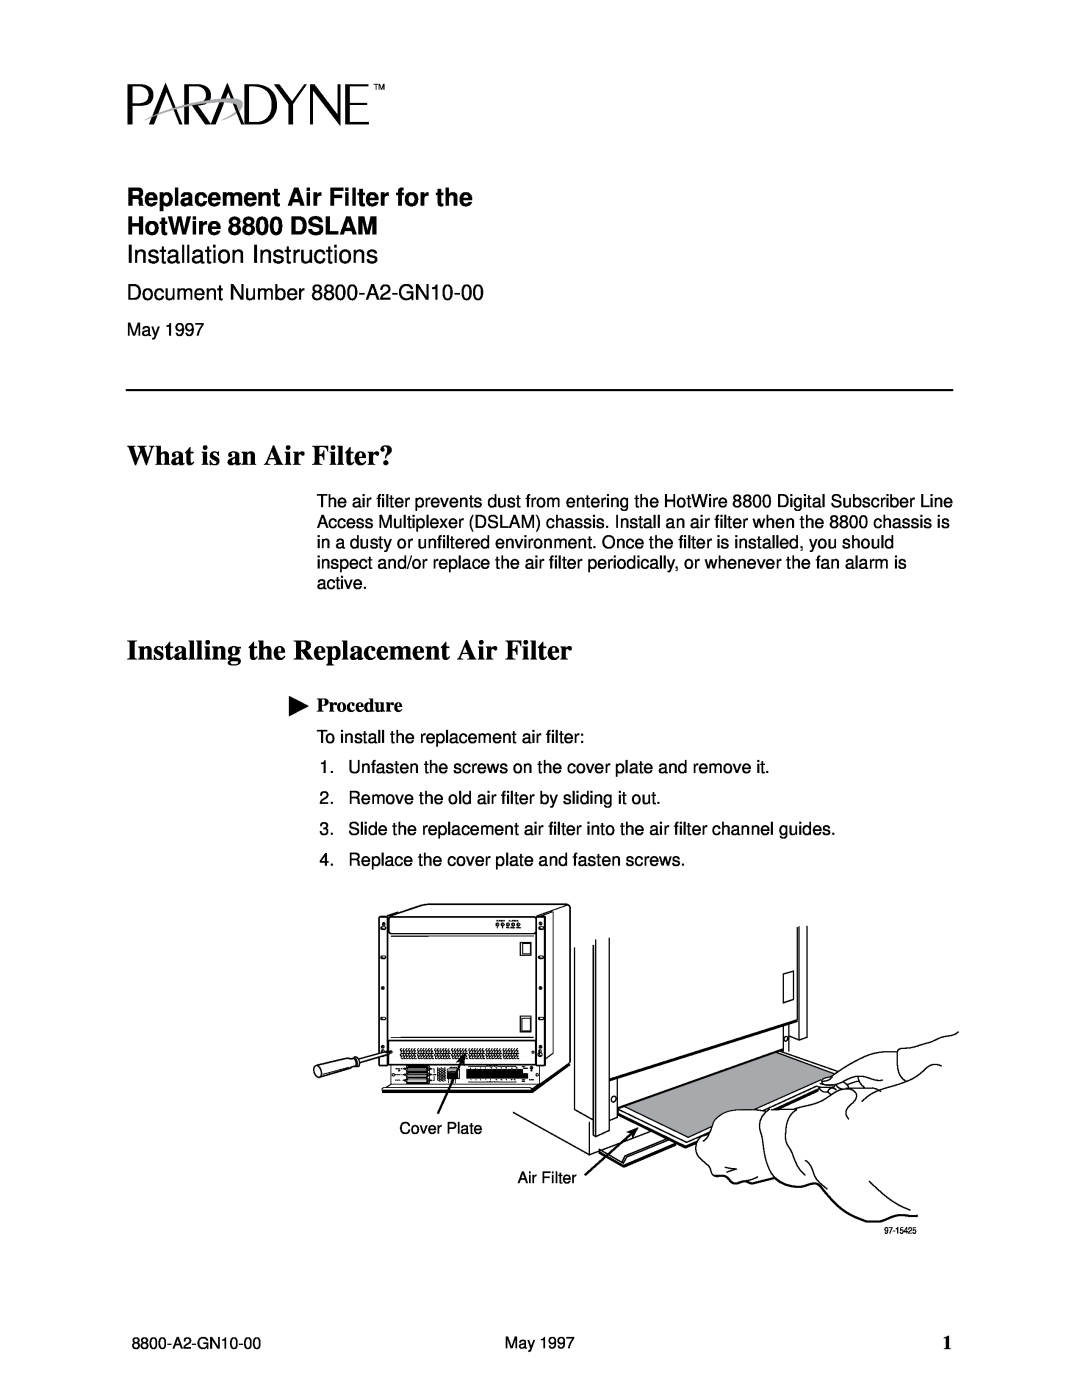 Paradyne 8800 DSLAM installation instructions What is an Air Filter?, Installing the Replacement Air Filter, Procedure 